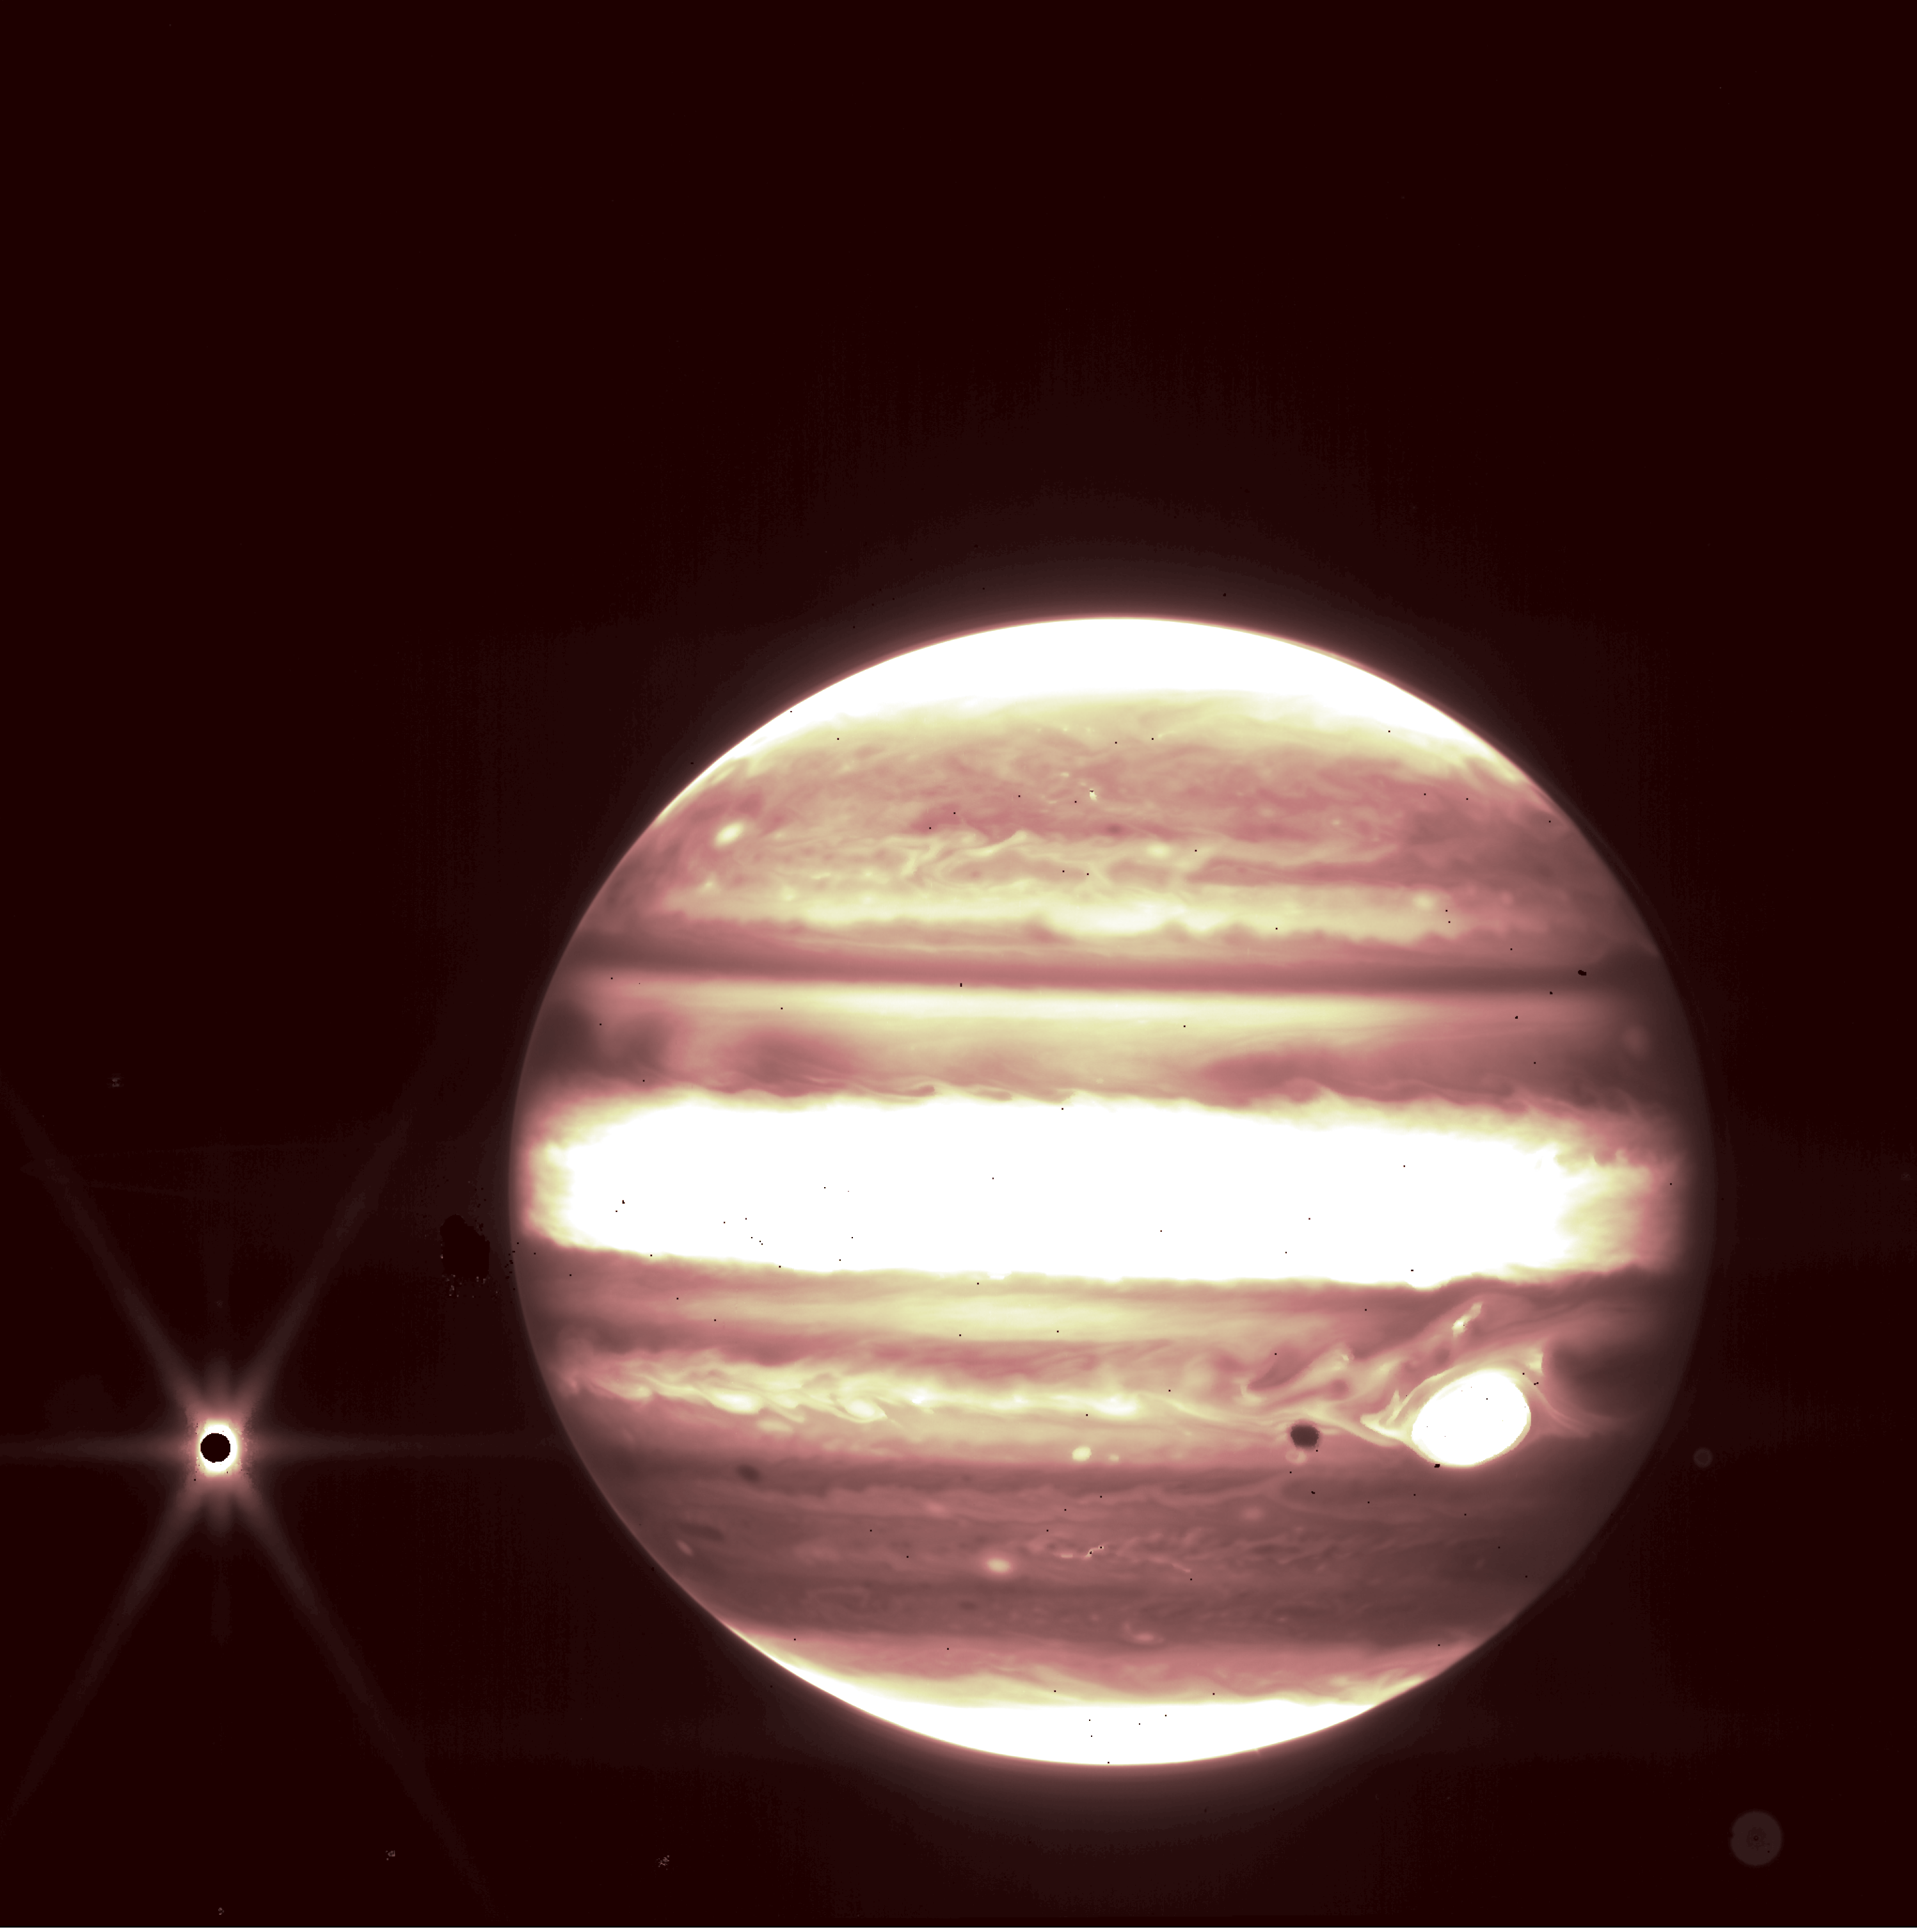 Jupiter as seen in near-infrared light by the James Webb Space Telescope. The Jovian moon Europa is seen at left